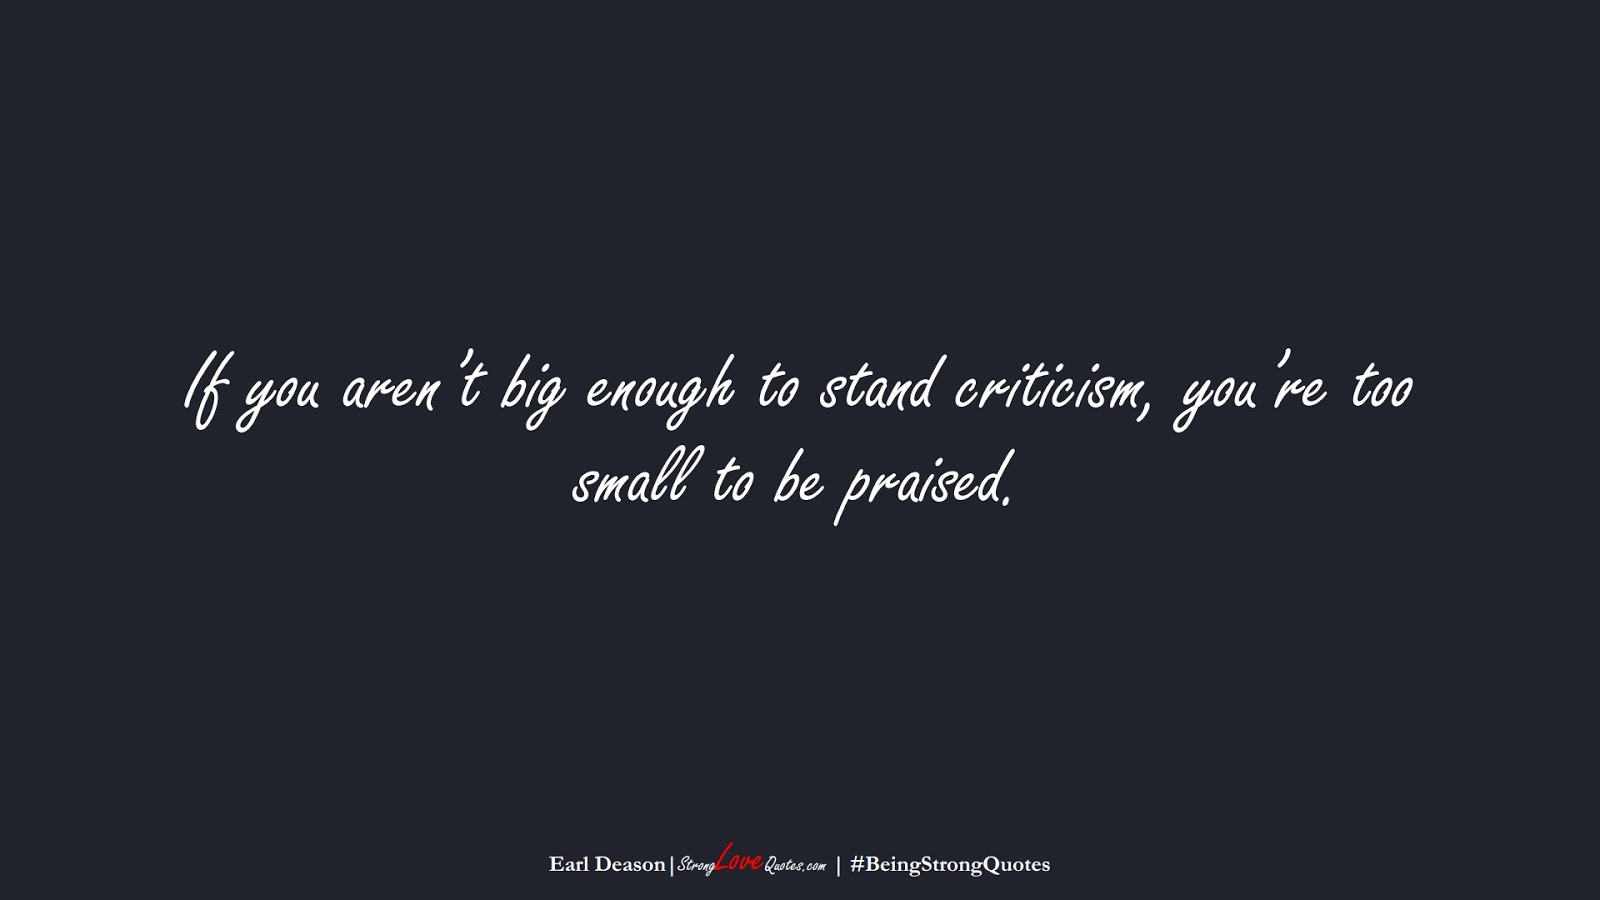 If you aren’t big enough to stand criticism, you’re too small to be praised. (Earl Deason);  #BeingStrongQuotes